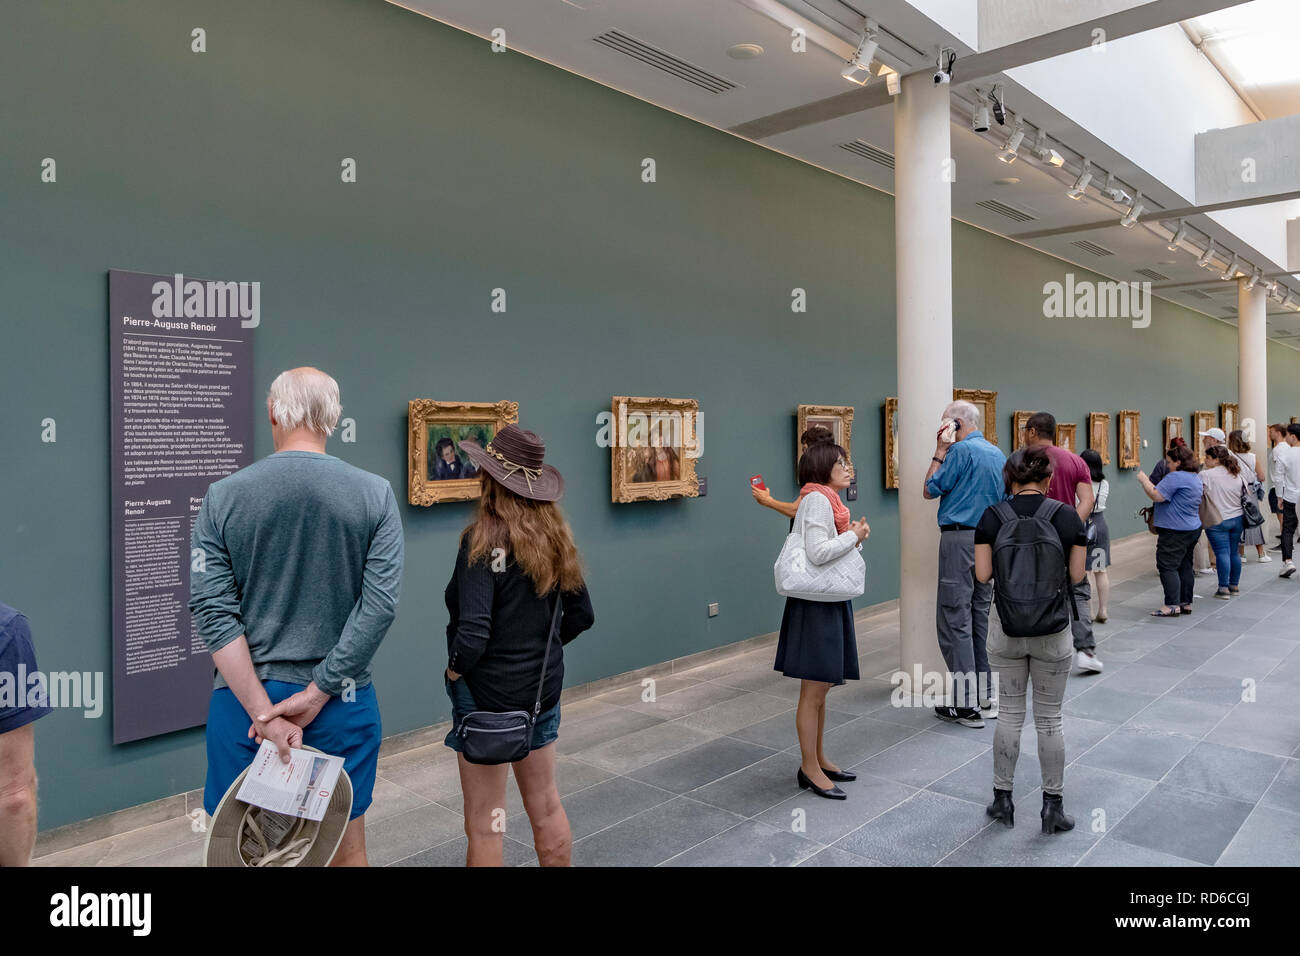 People admiring the impressionist paintings housed in The basement area of The Musée de l'Orangerie ,Paris, France Stock Photo